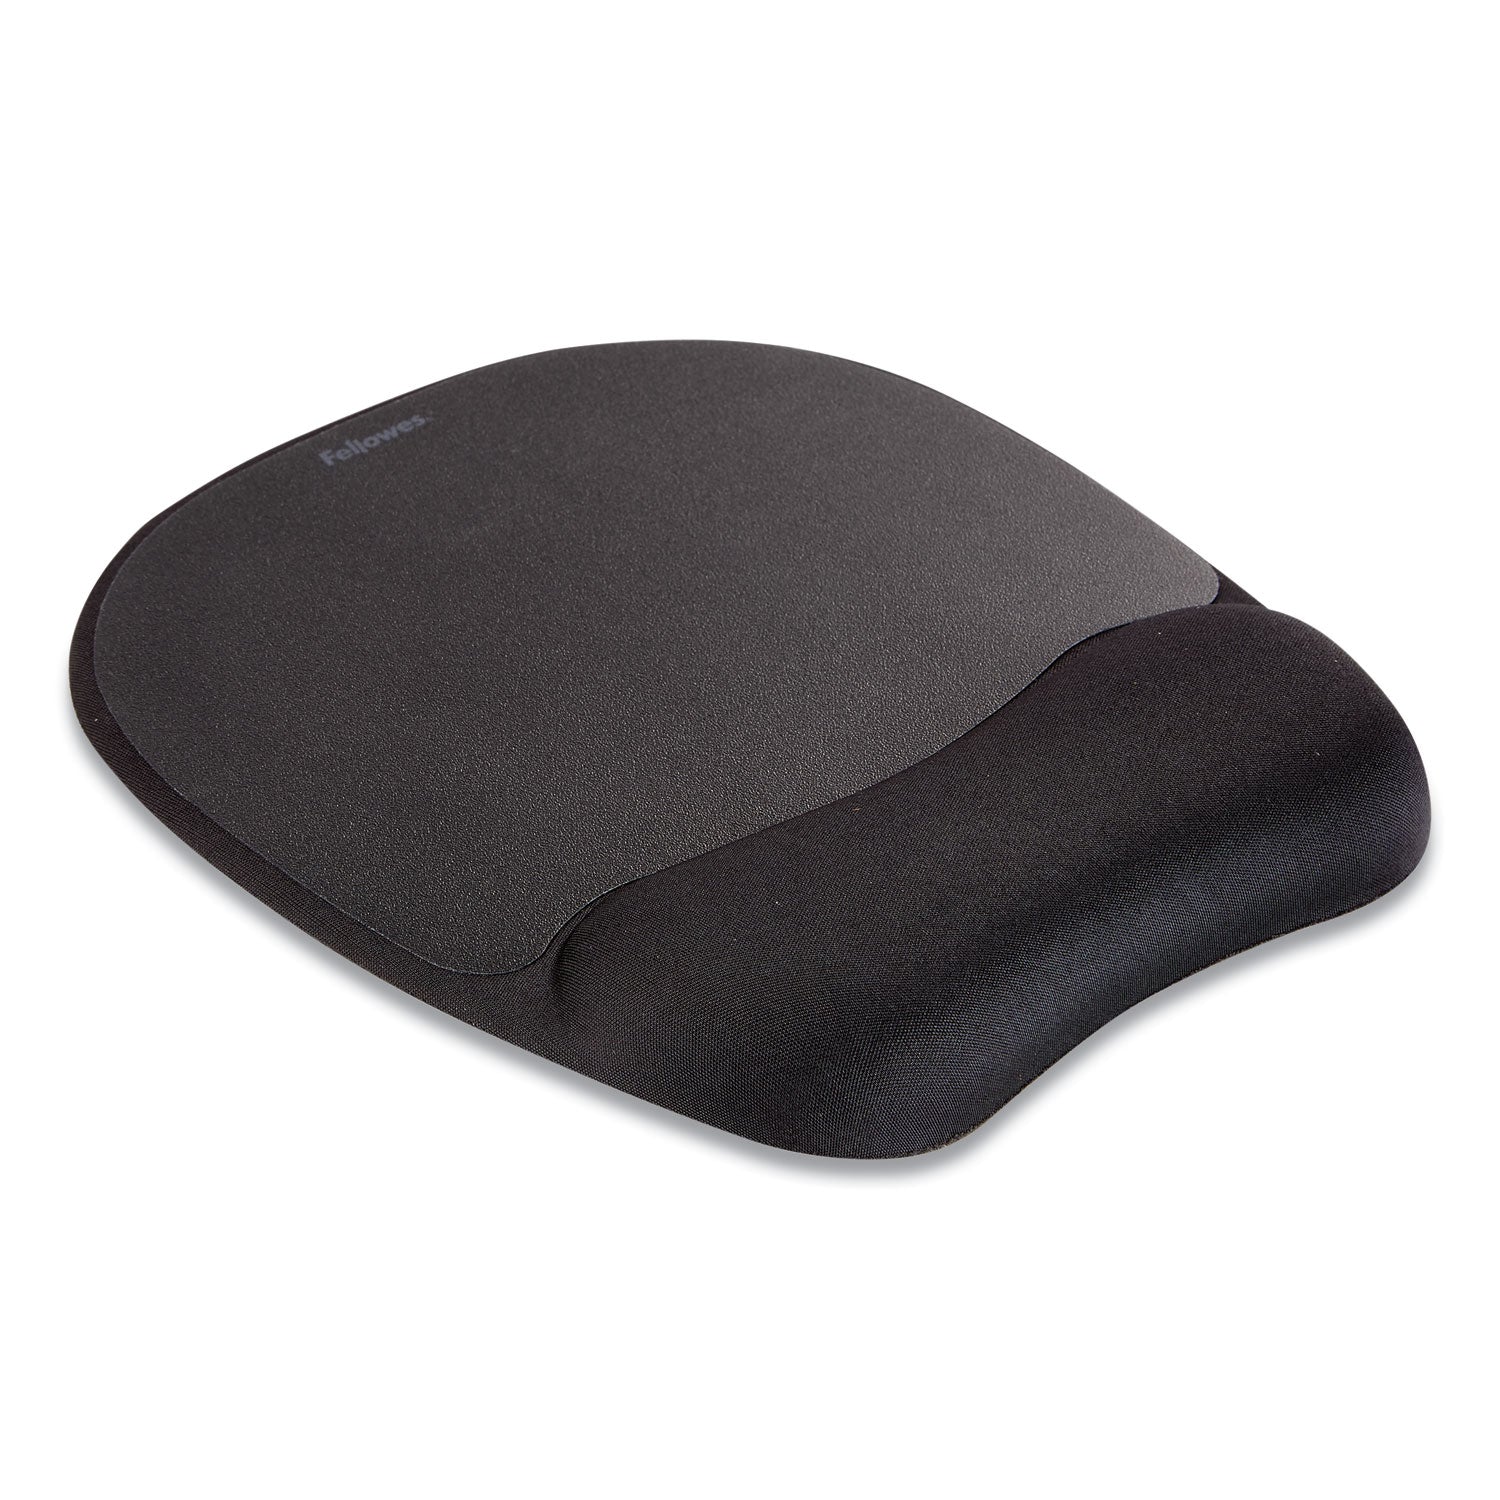 Memory Foam Mouse Pad with Wrist Rest, 7.93 x 9.25, Black - 